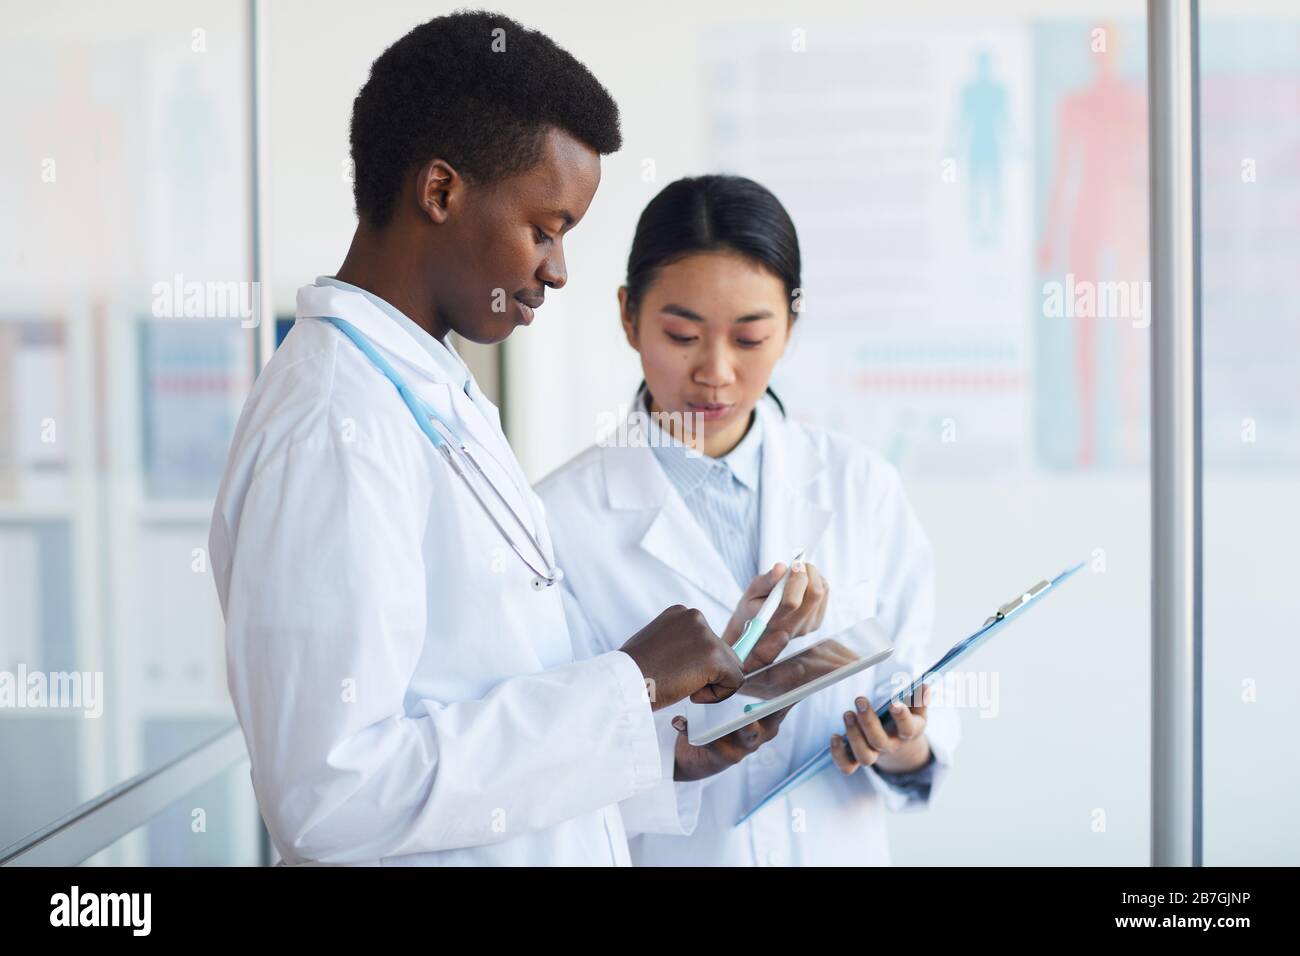 Side view portrait of young African-American doctor talking to female colleague in medical office interior, copy space Stock Photo